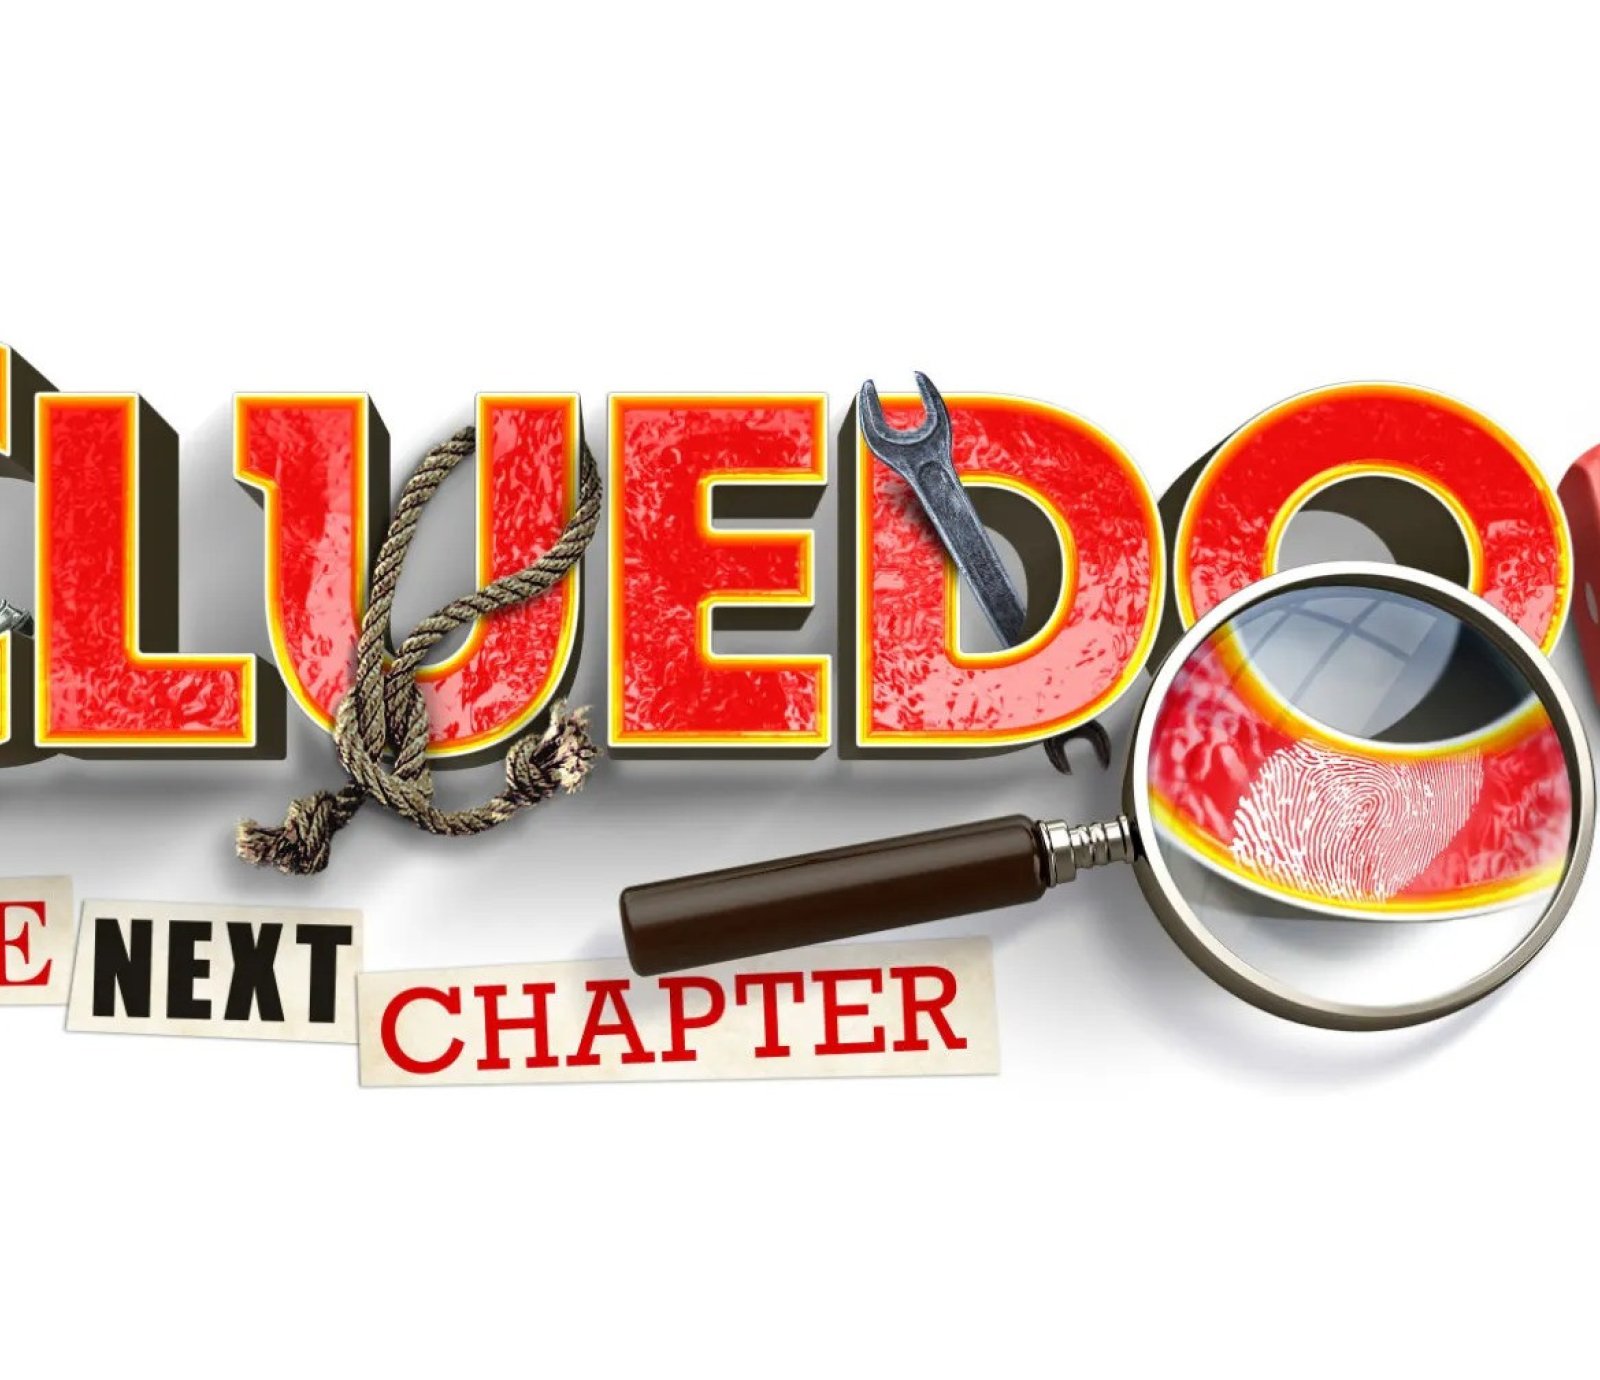 Cluedo 2 - The Next Chapter